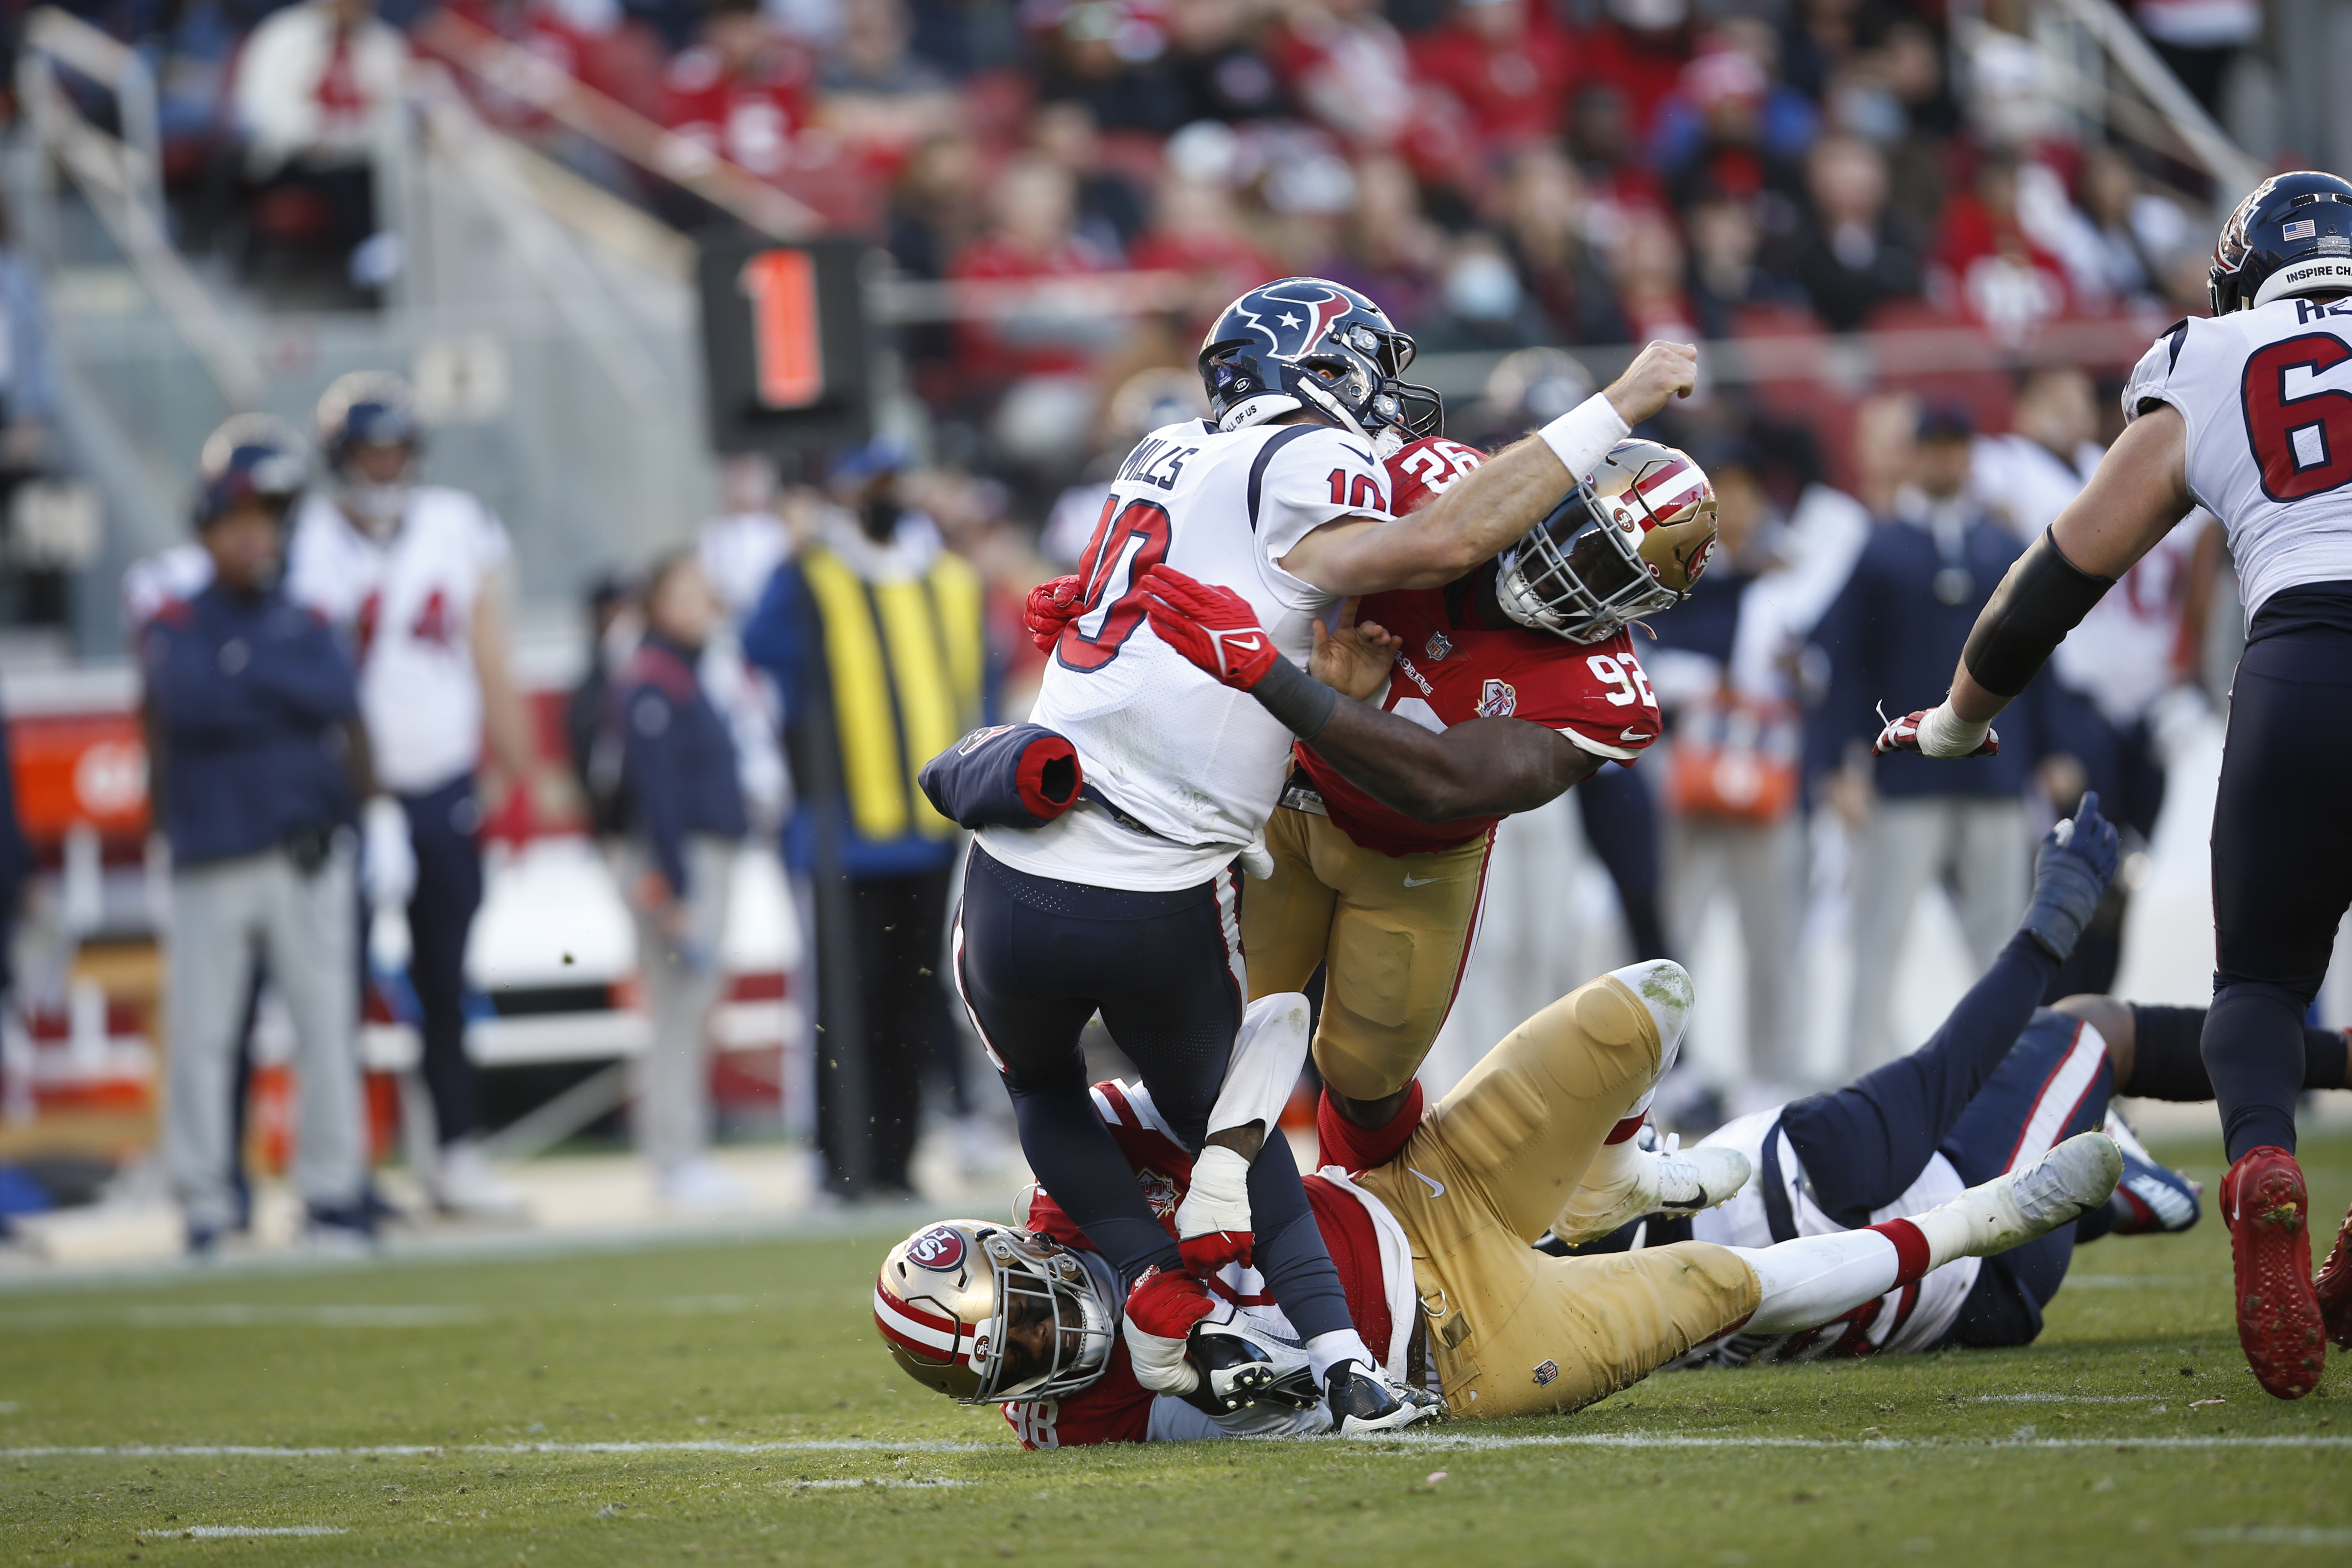 Charles Omenihu on Playing for 49ers After Texans: 'It’s Not a Circus Show Here'